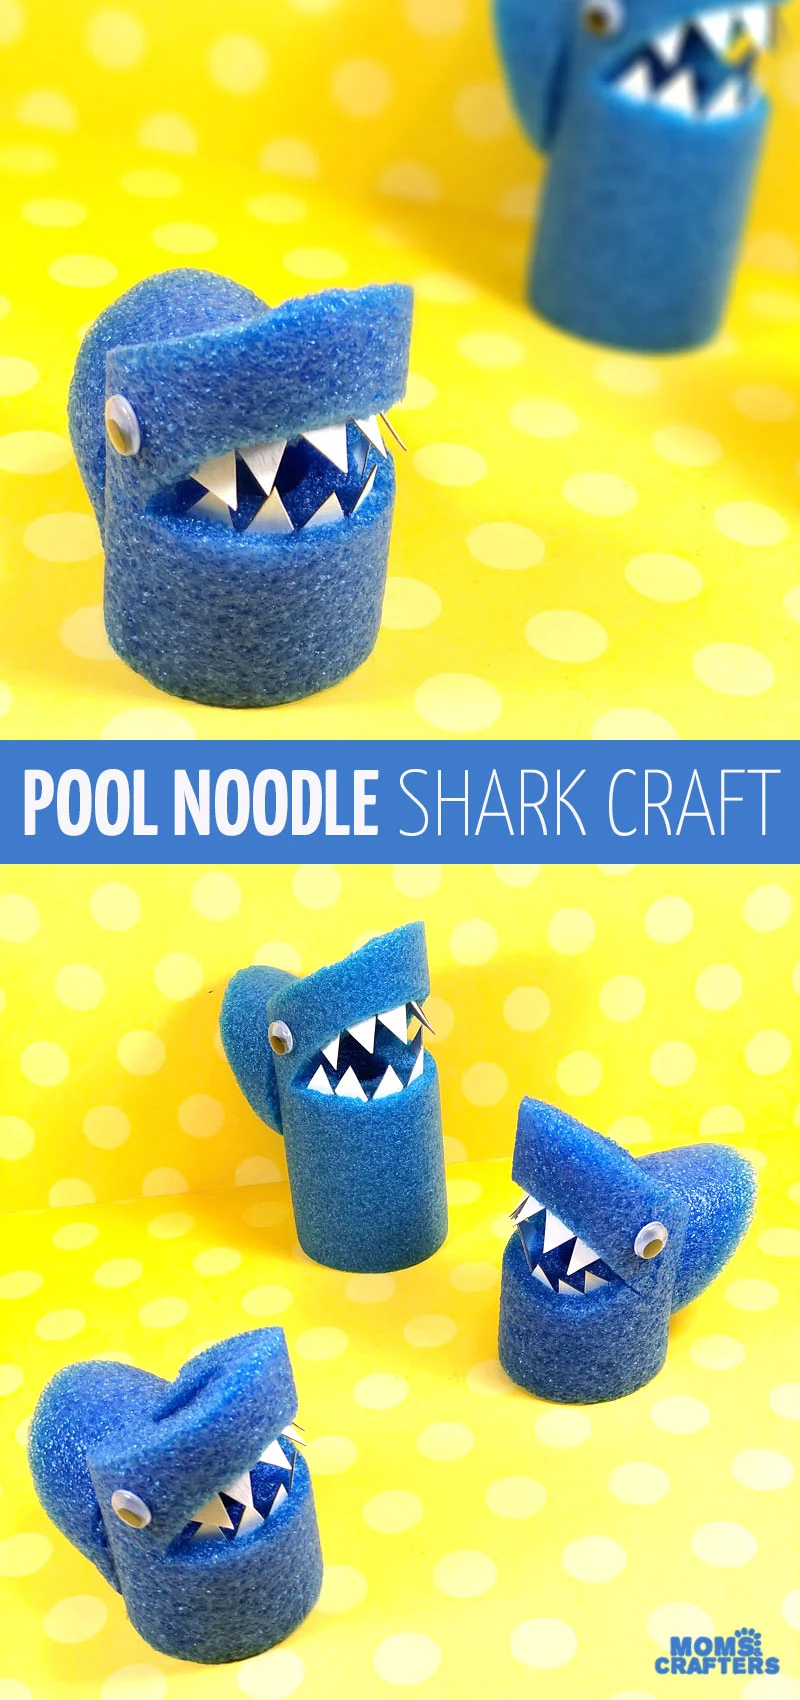 Make this adorable pool noodle shark craft for shark week or summer! This adorable dollar store craft uses pool noodles in a fun repurposed craft for kids. 